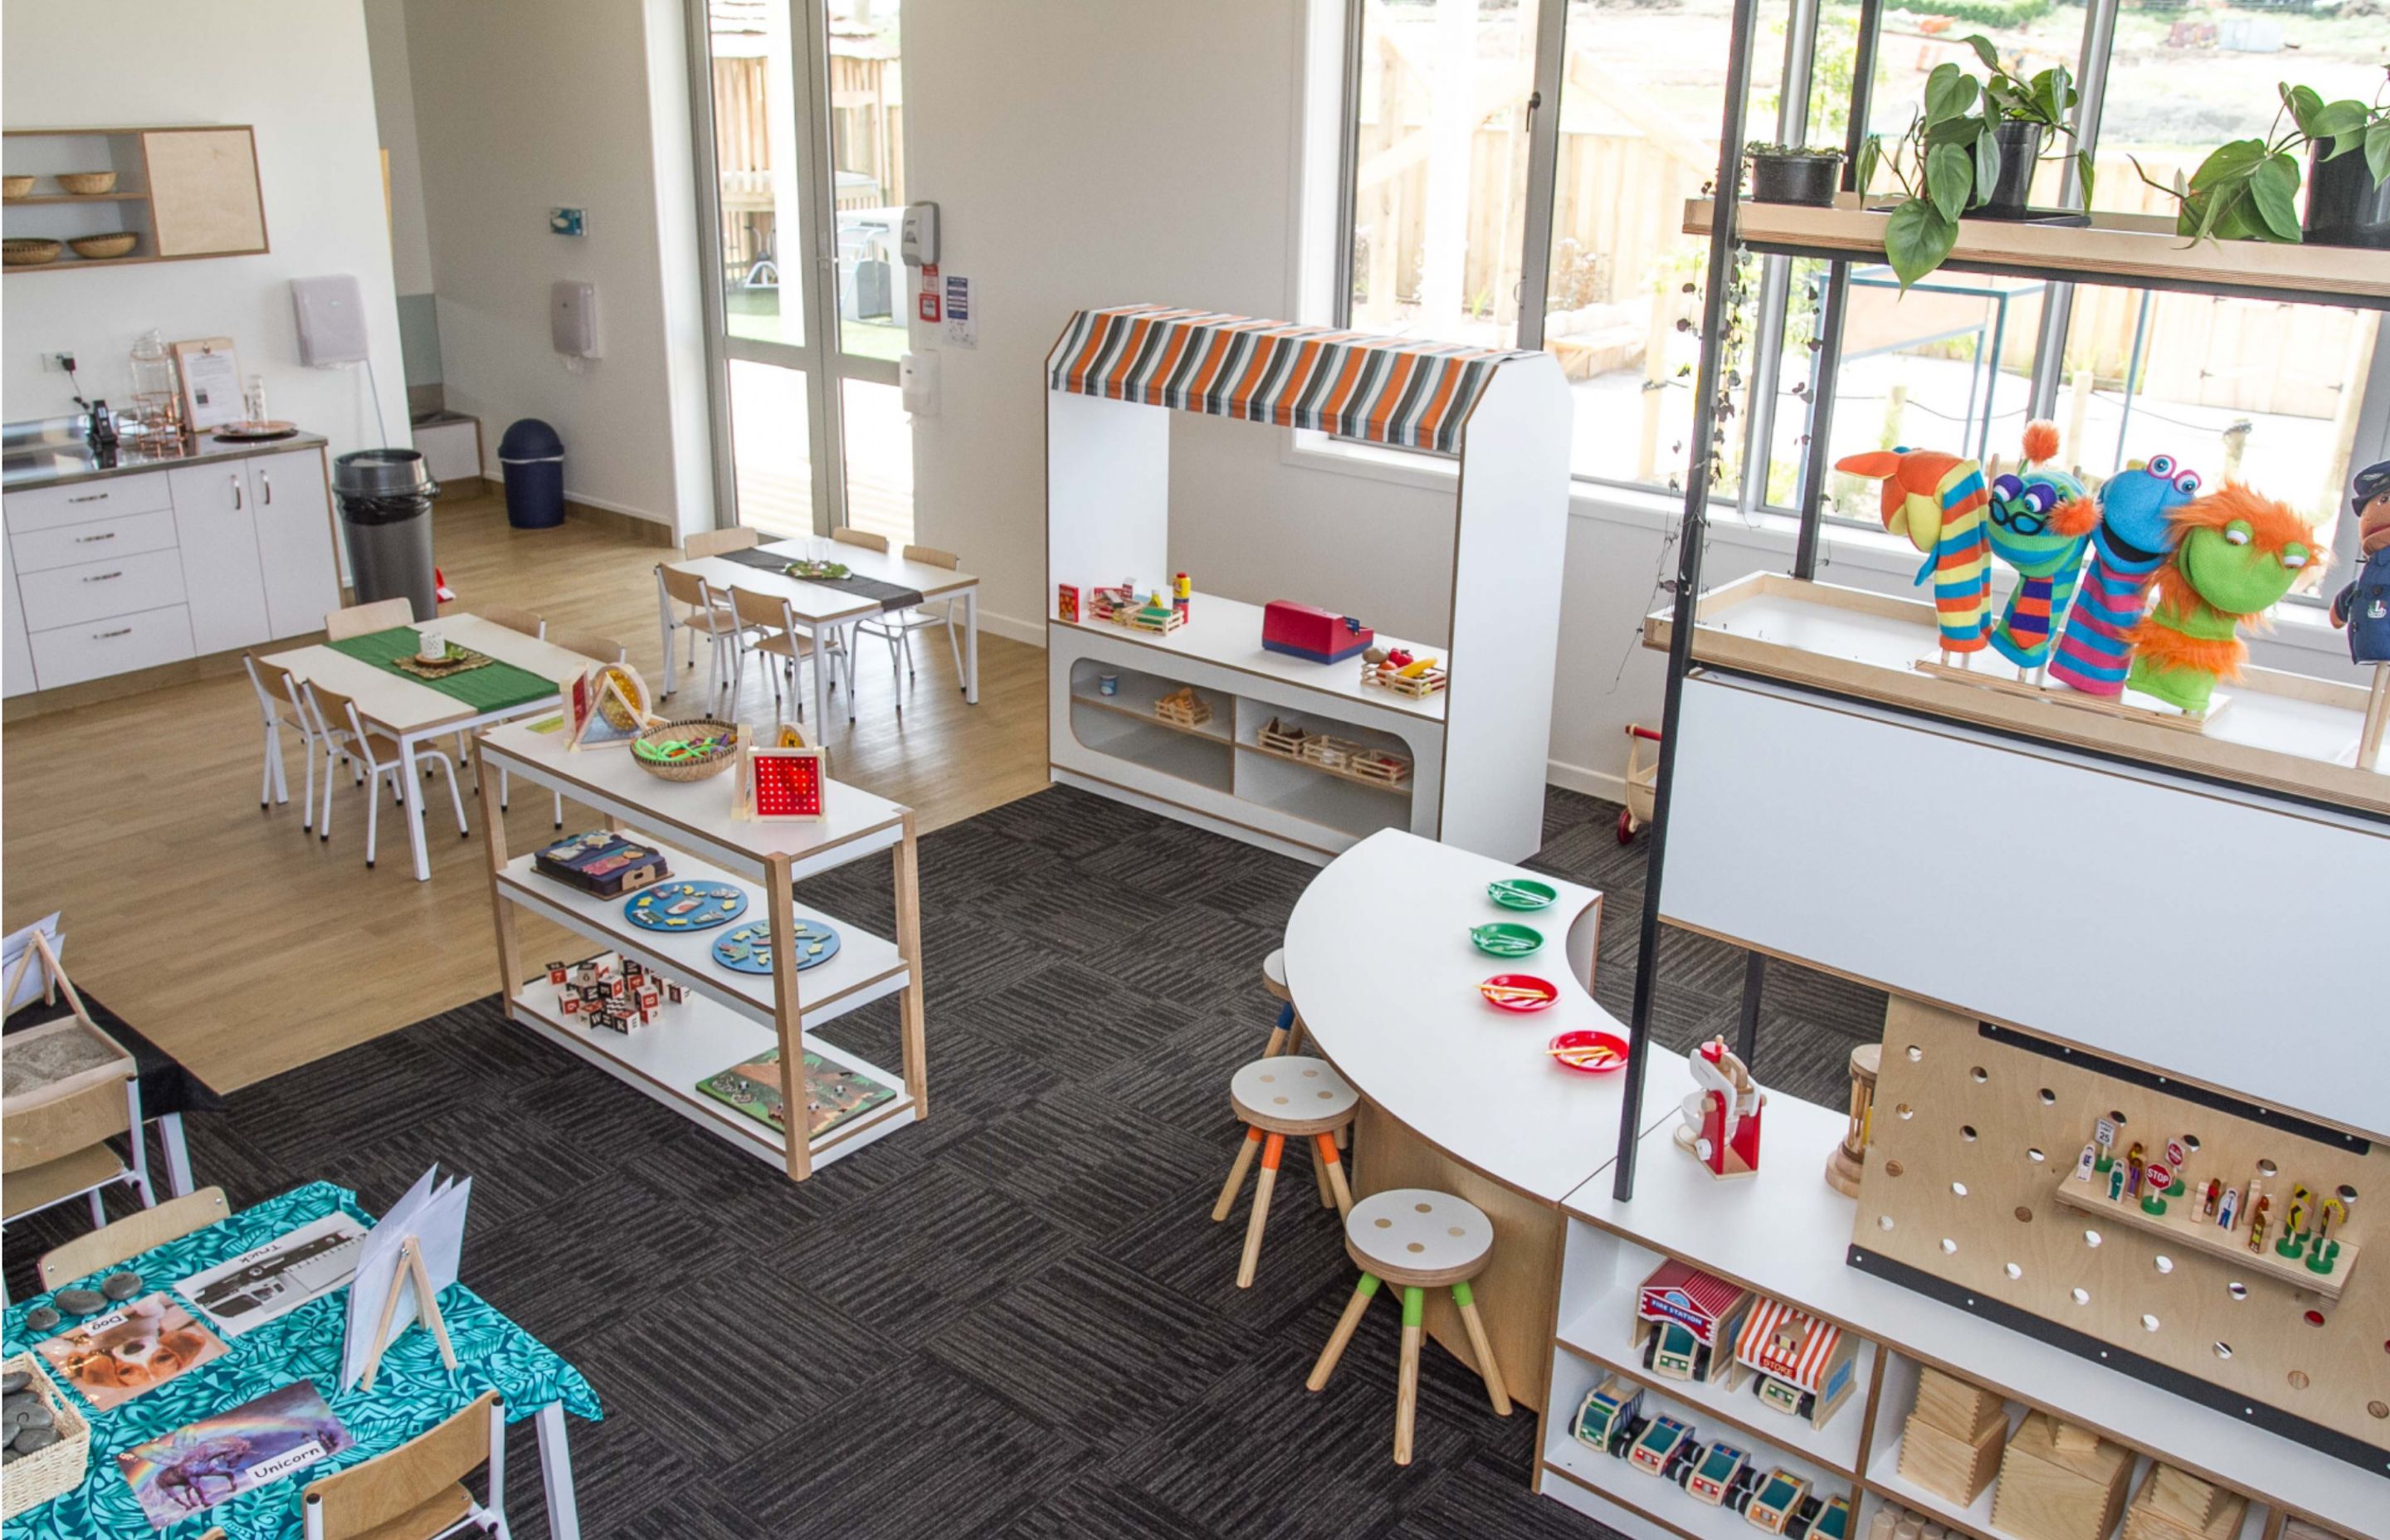 Plytech offers six plywood products in the Plytech Green range including Futura Matt high-pressure laminate, as seen here in Hamilton's Borman Village Kids childcare centre by Starex NZ.